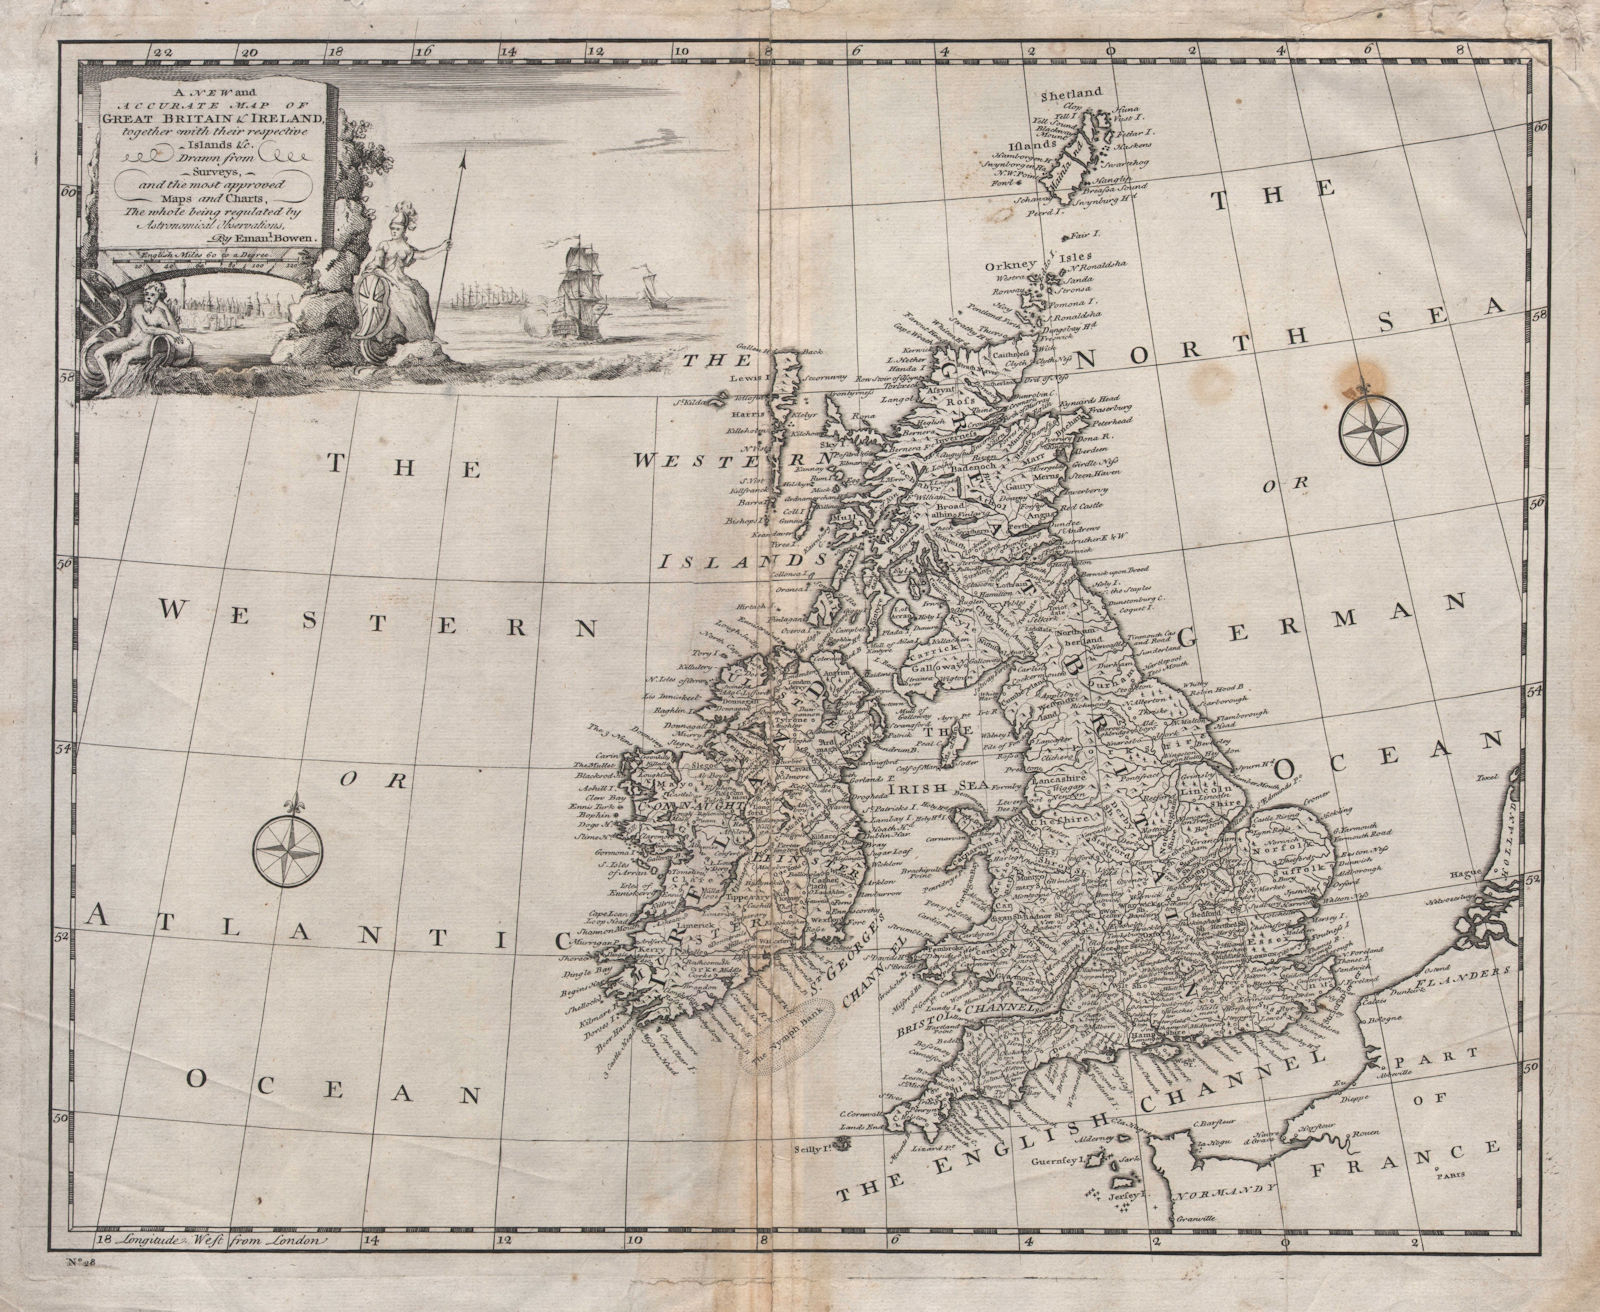 "A new and accurate map of Great Britain & Ireland…" by Emmanuel BOWEN 1752